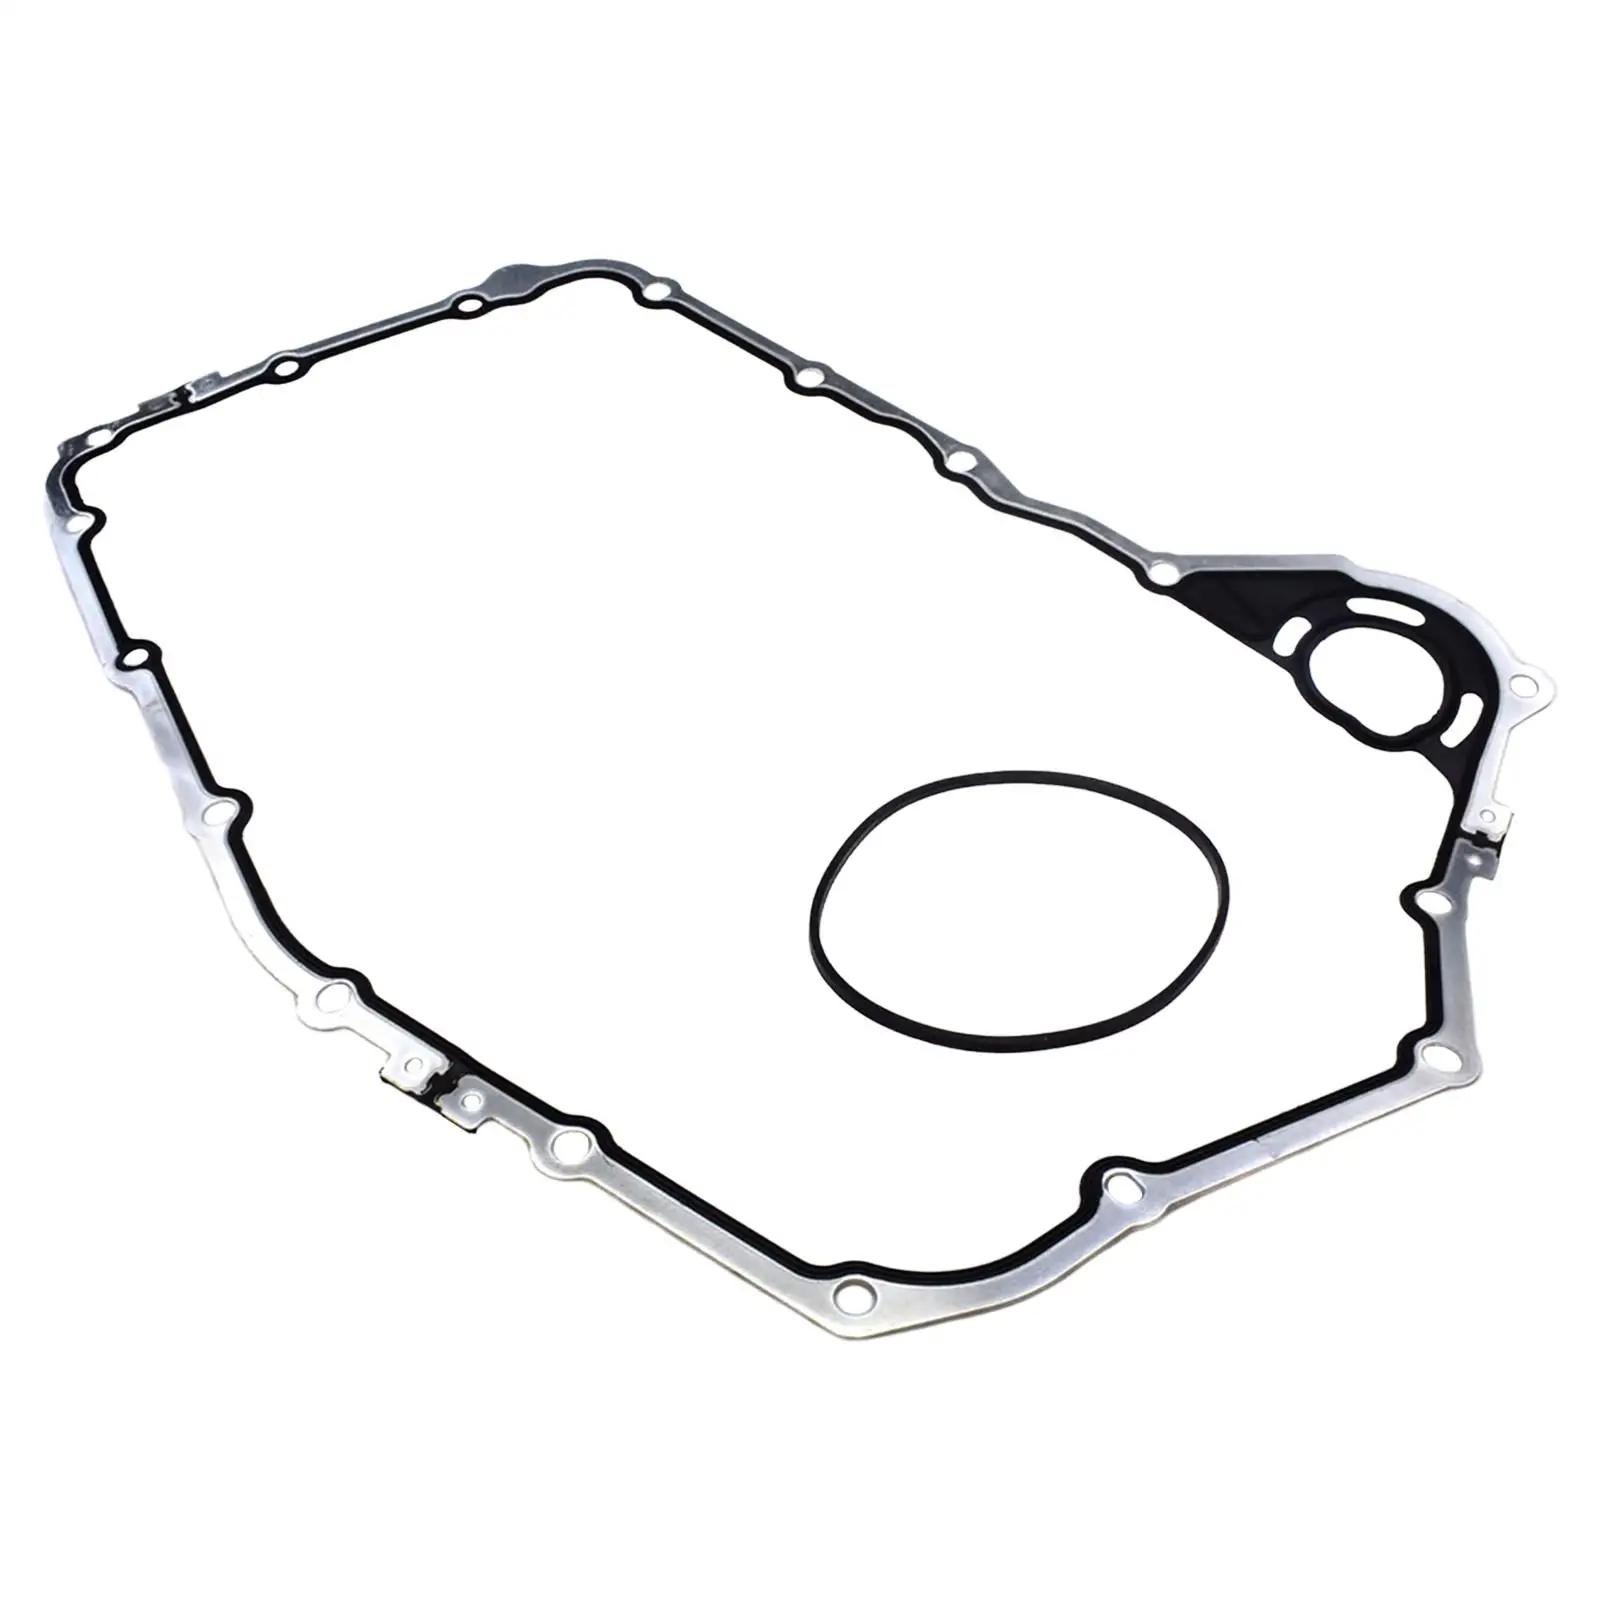 Engine Automatic Transmission Case Gasket 24206959 Fits for 3.0 Parts